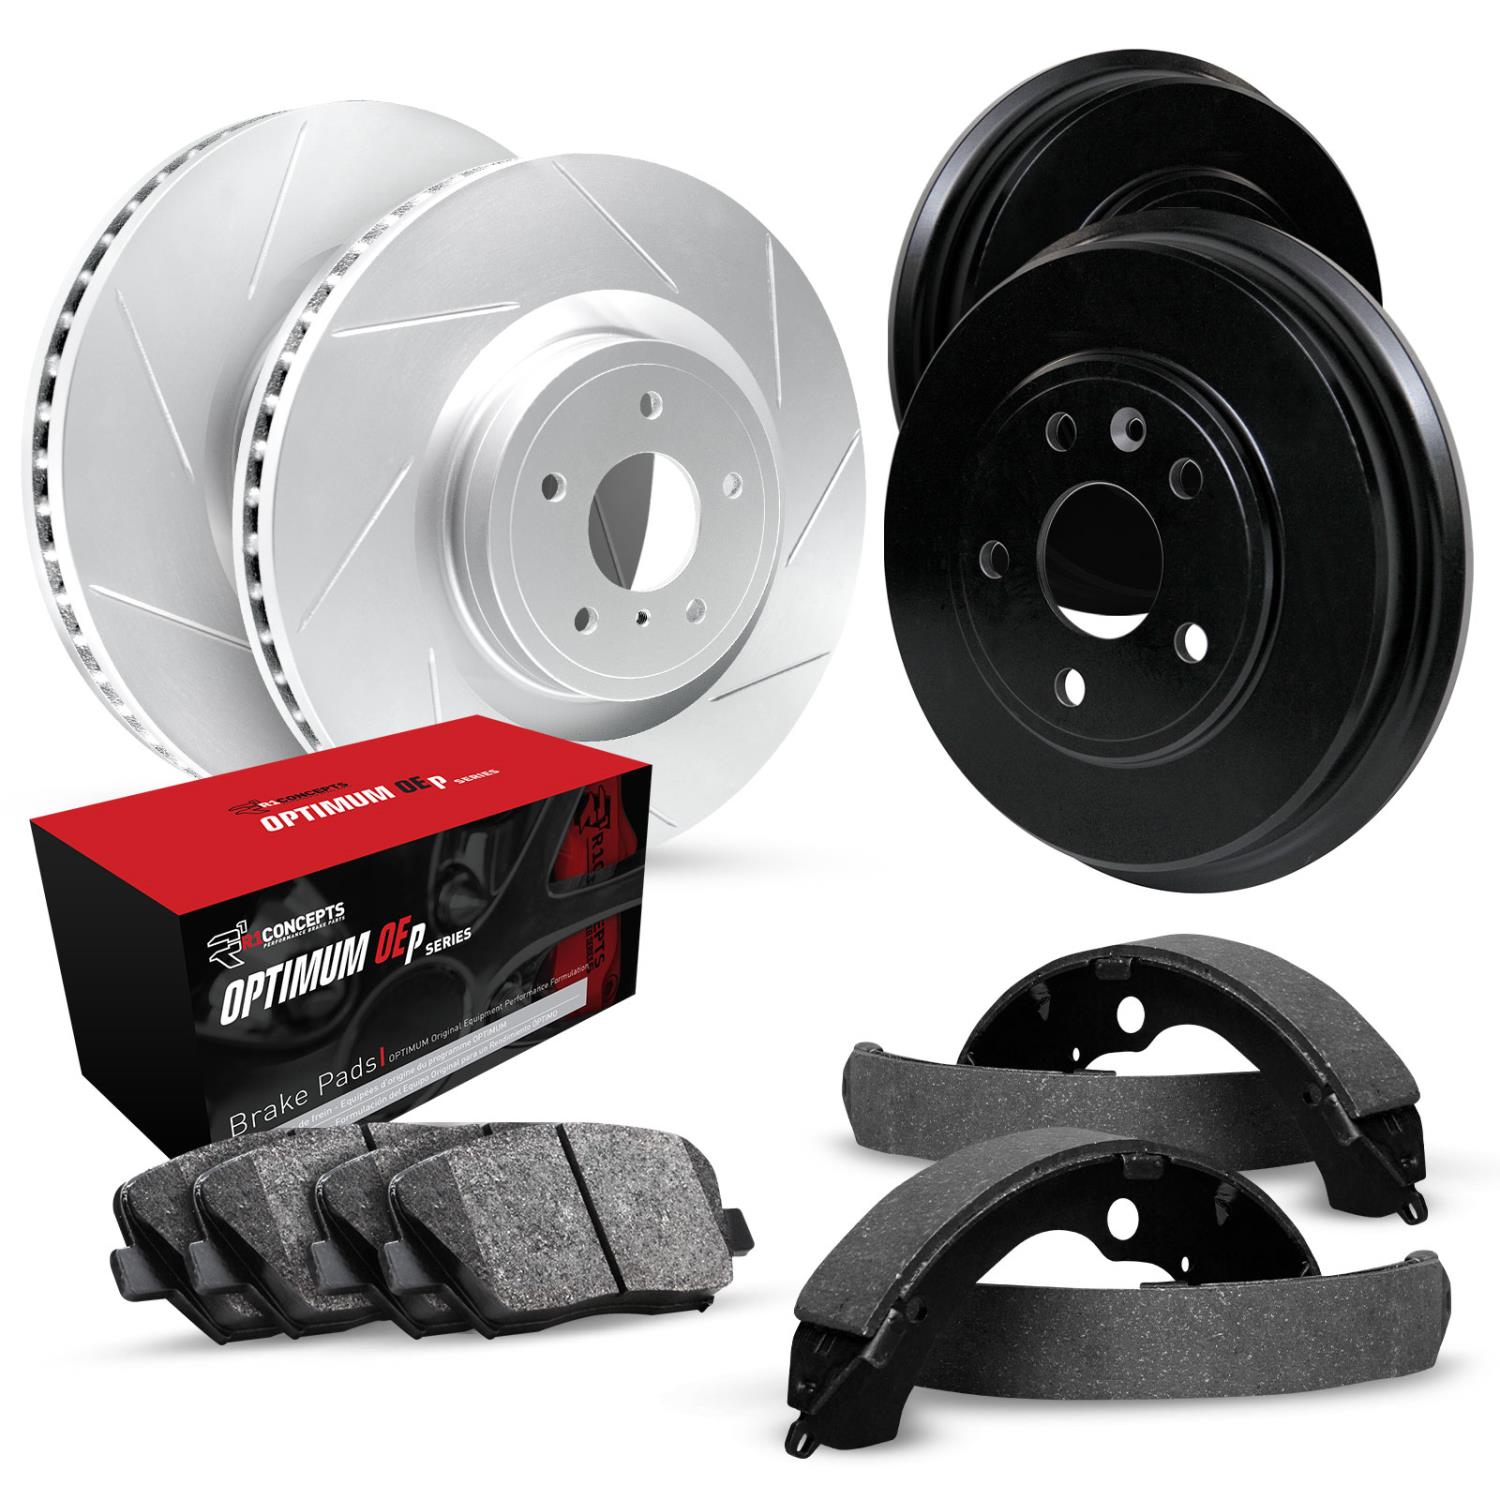 GEO-Carbon Slotted Brake Rotor & Drum Set w/Optimum OE Pads & Shoes, 1985-1986 GM, Position: Front & Rear